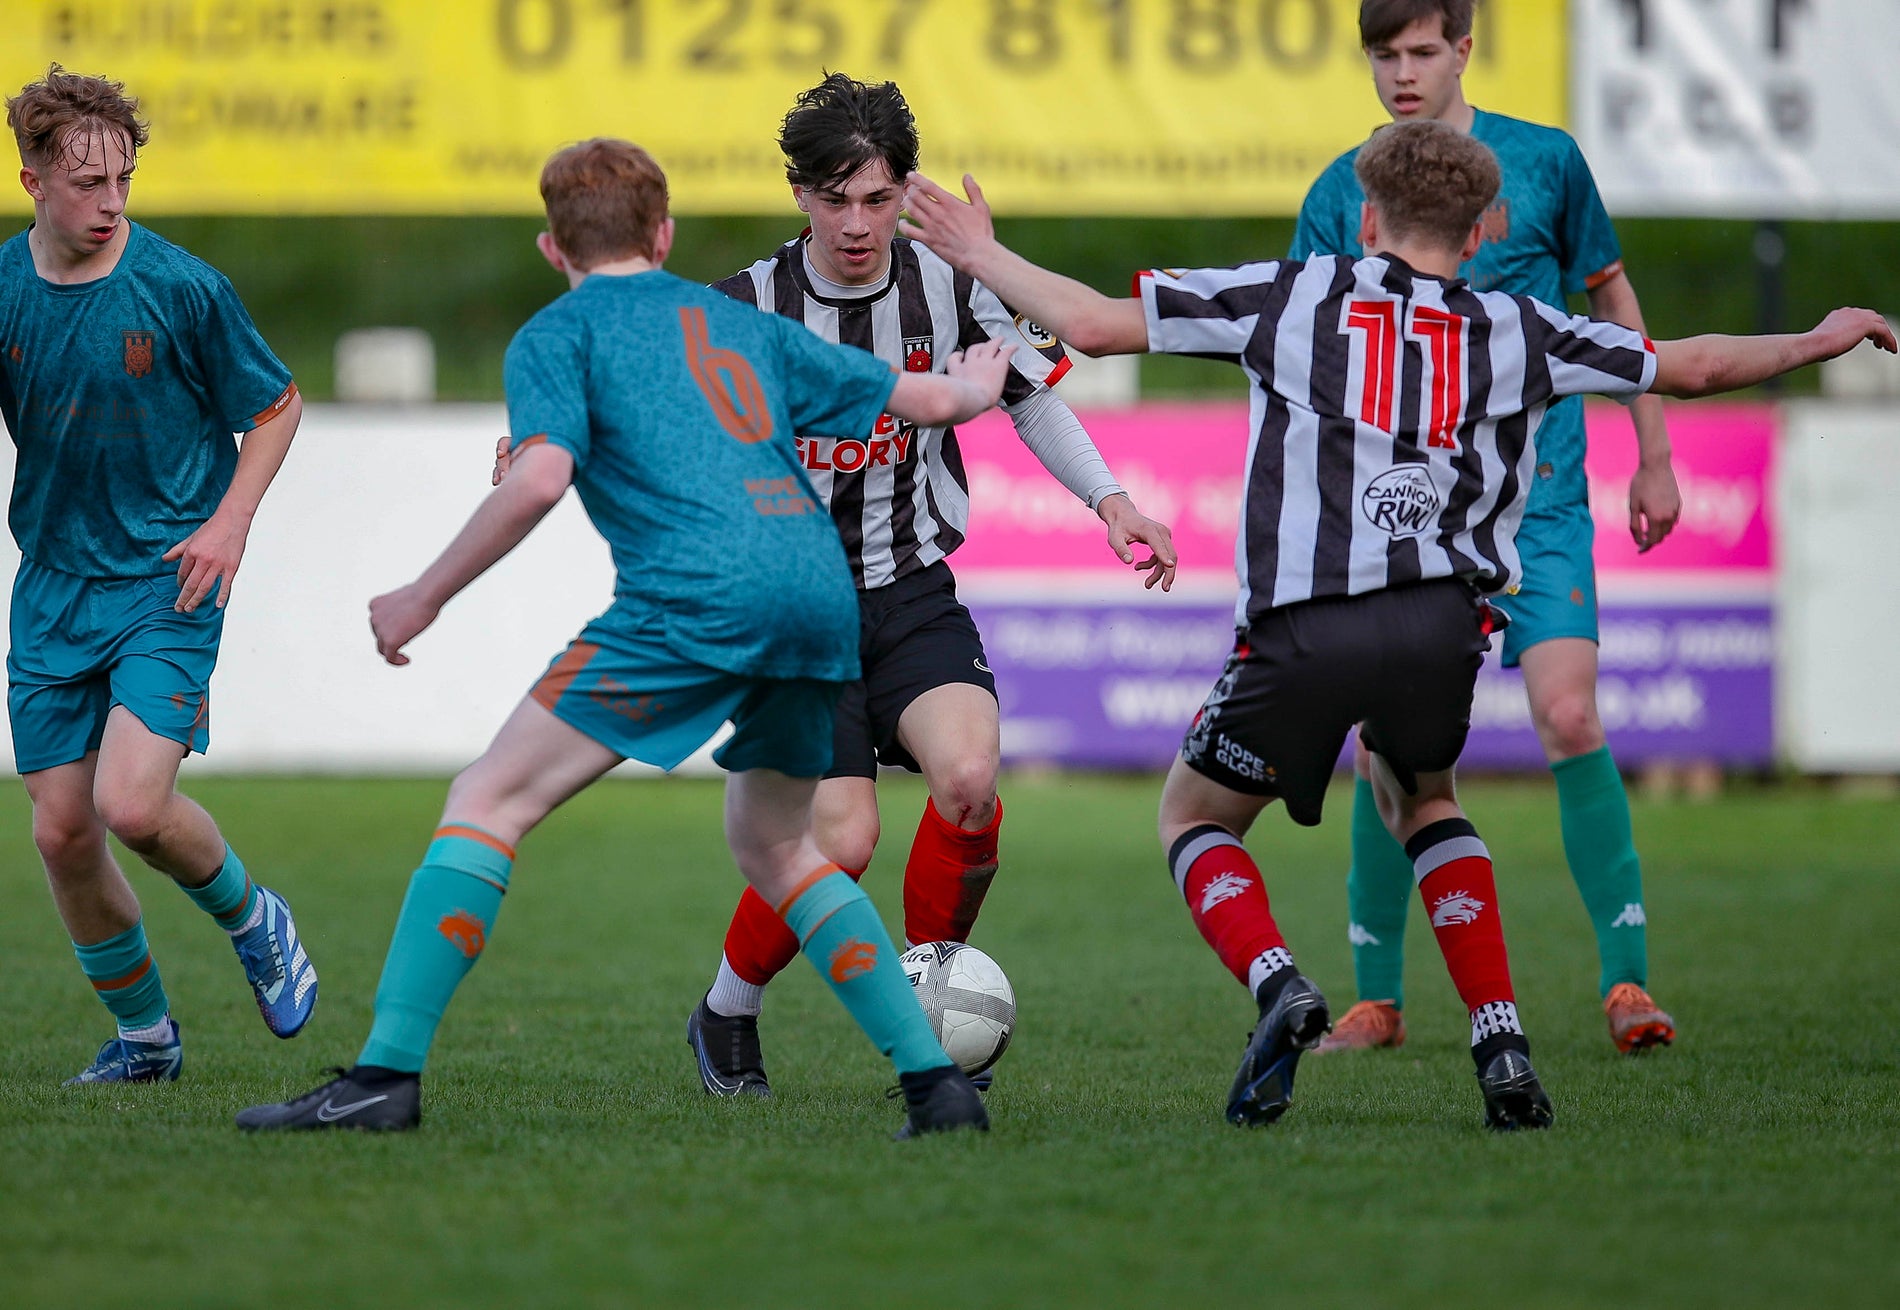 Chorley FC youth trial dates confirmed